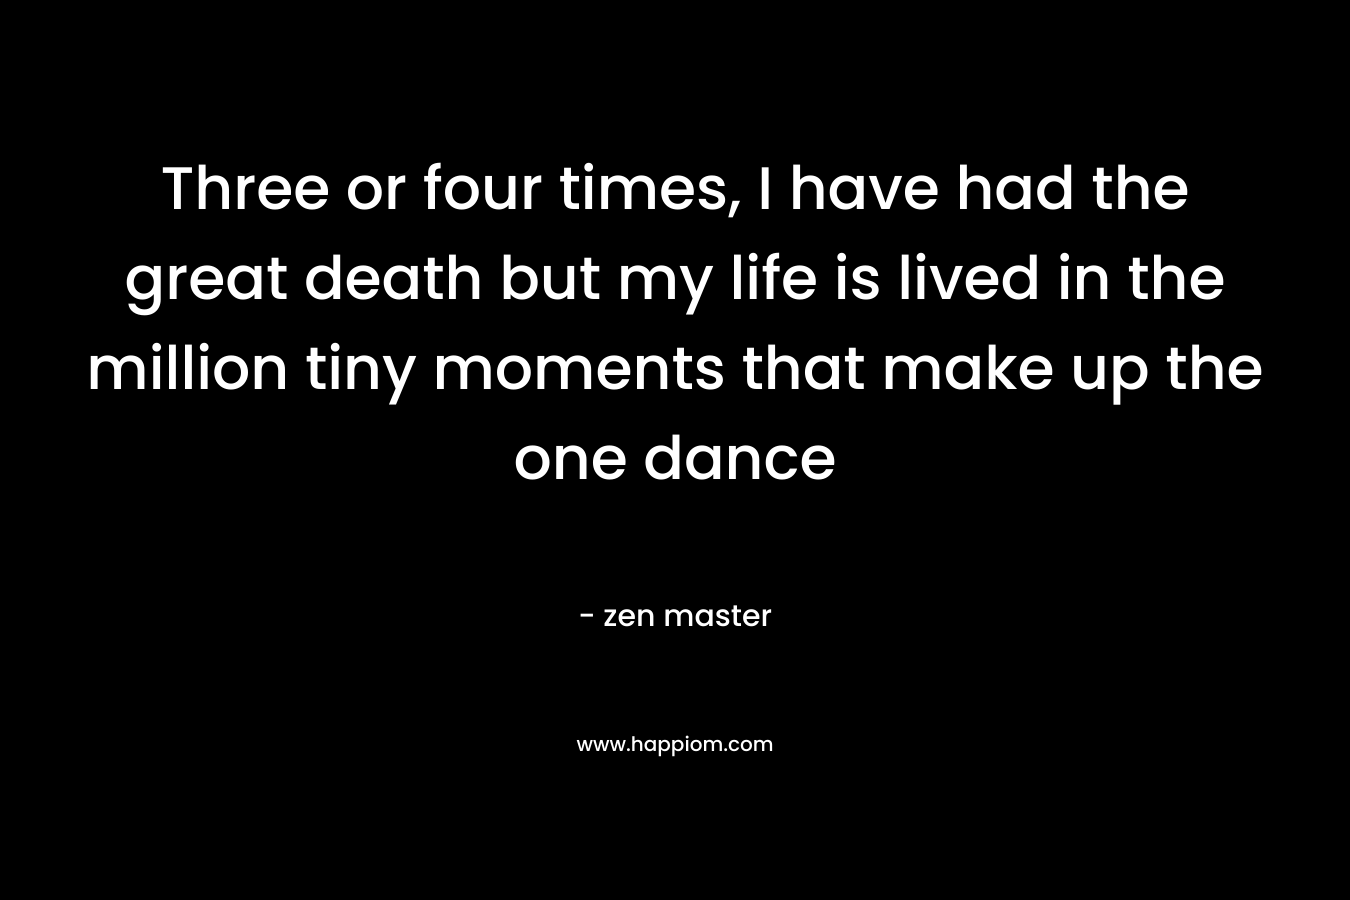 Three or four times, I have had the great death but my life is lived in the million tiny moments that make up the one dance – zen master